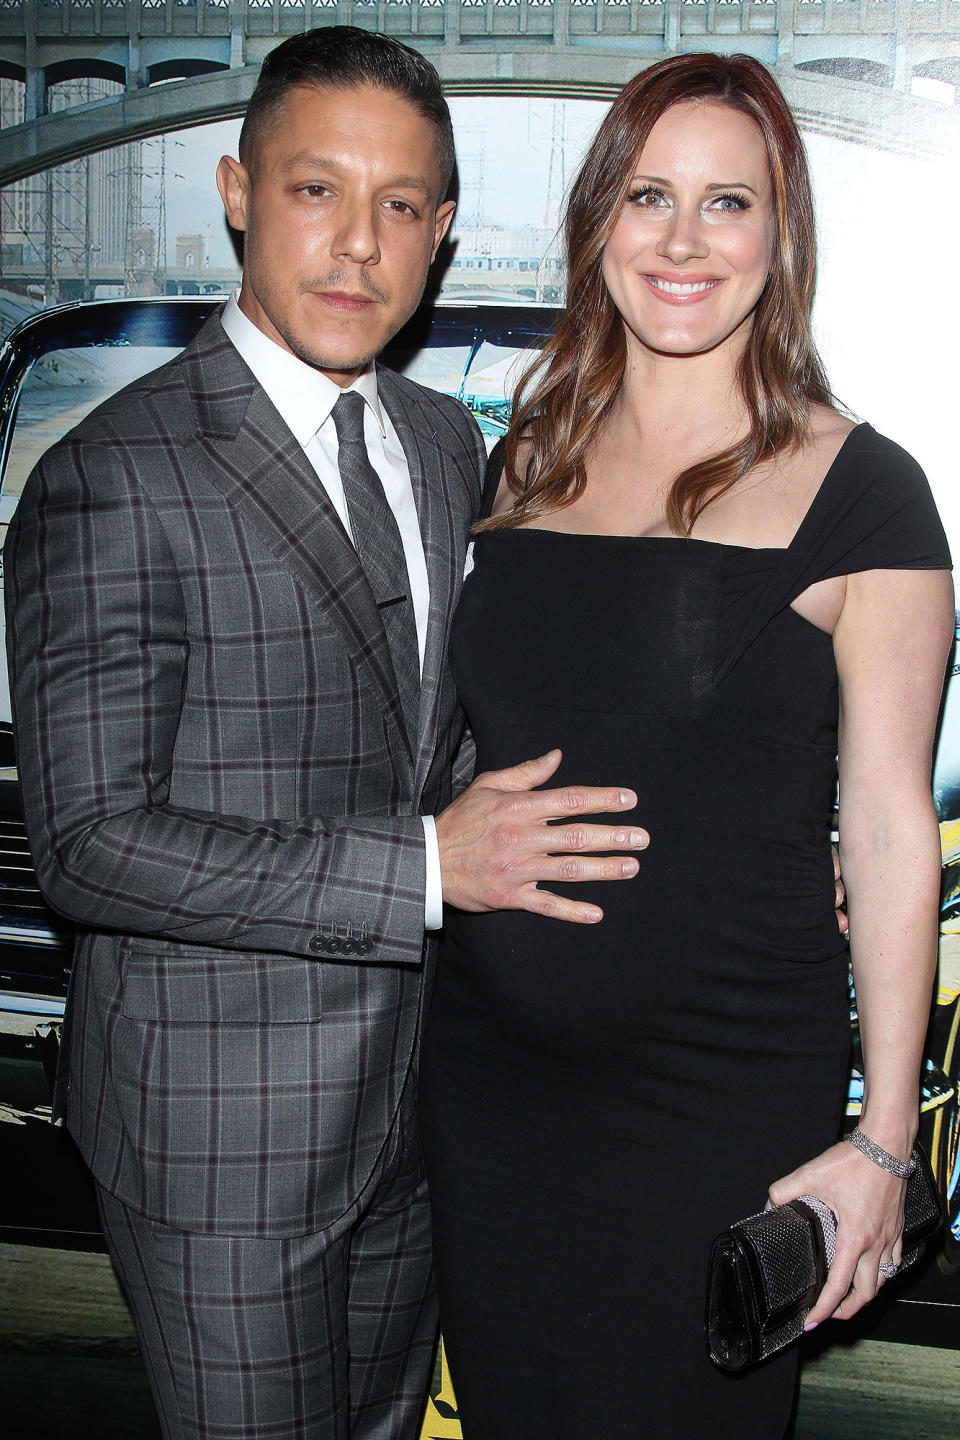 <p>Former <em>Sons of Anarchy </em>star Theo Rossi and his wife Meghan <span>welcomed their second child </span>on August 3, at 3:06 p.m. in New York, his rep confirmed to PEOPLE. Son Arlo Benjamin Rossi was born weighing 8 lbs., 13 oz., and measured 20½ inches long. The couple are already parents to son Kane Alexander. "My wife and I couldn’t be happier or more grateful to welcome our son, Arlo Benjamin Rossi, into the world!” the actor told PEOPLE.</p>